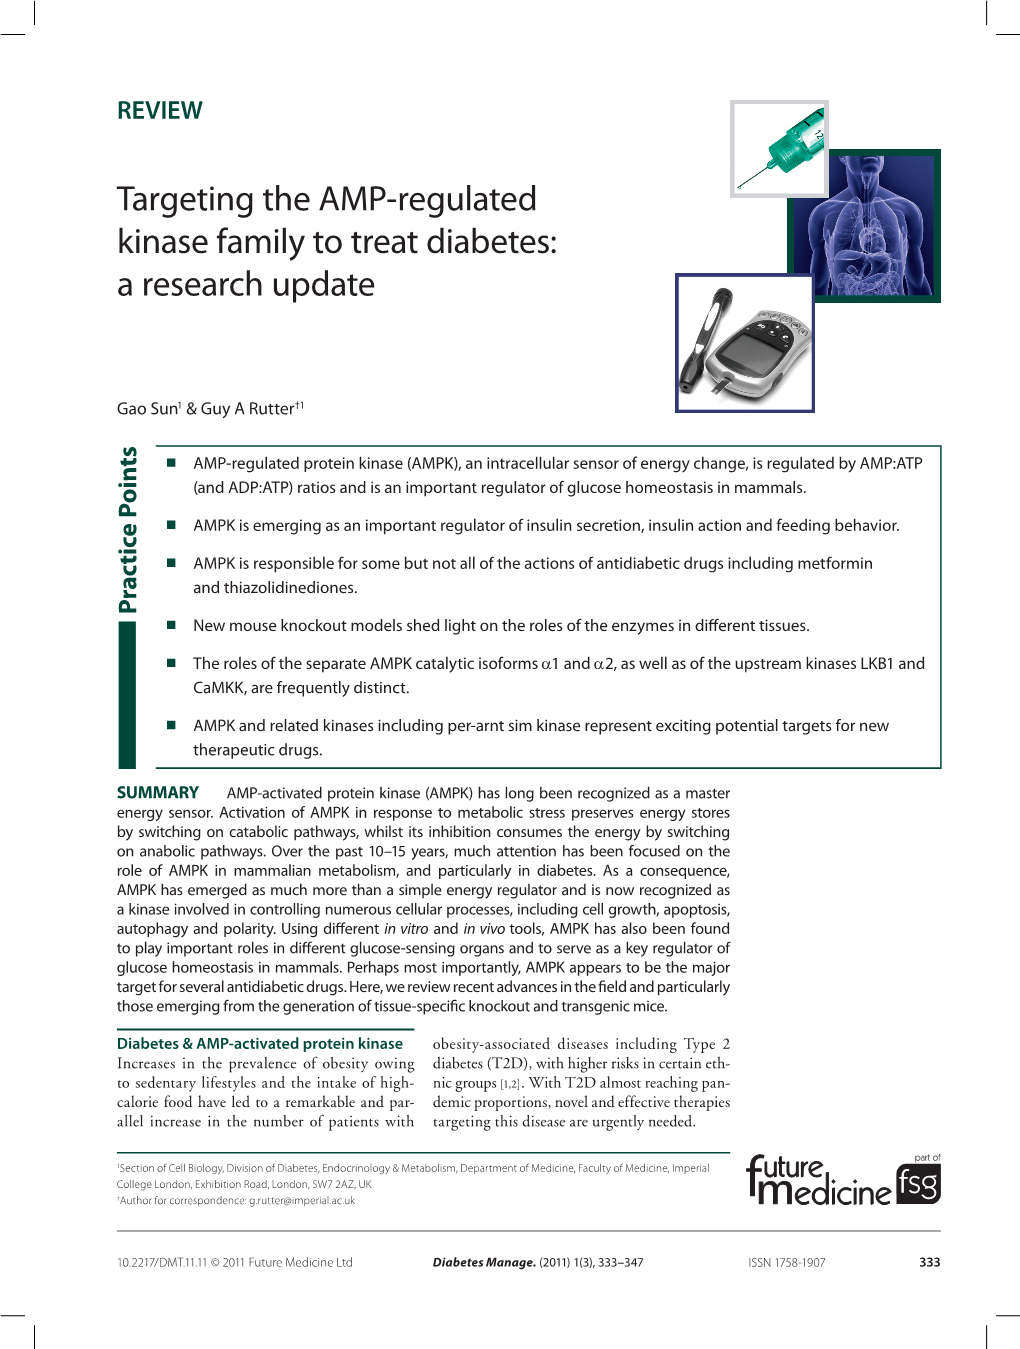 Targeting the AMP-Regulated Kinase Family to Treat Diabetes: a Research Update